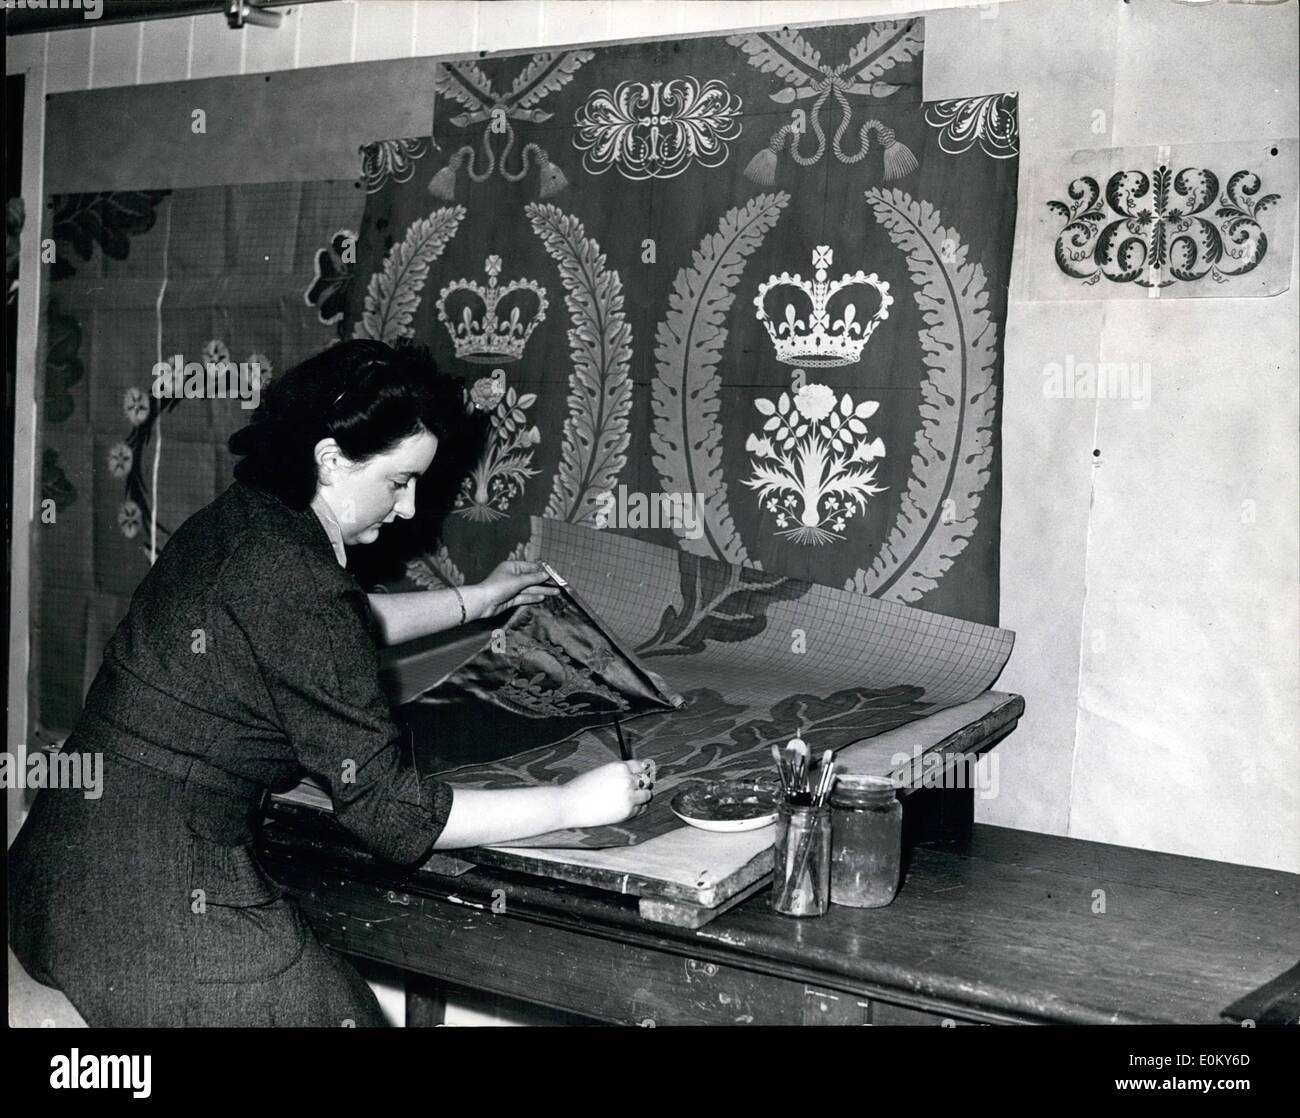 Nov. 11, 1952 - Experimenting on Silk Fabrics for Coronat Ion Hanging in Westminster Abbey: Work is in progress at Mesers. Warmer & Sons, Braintree, Esex - experimenting on the weave for a silk fabric in rich design for the covering of a large parts of Westminster Abbey, during the Coronation ceremonies..Mesers. Warners are producing the special velvet for the Queen's Coronation Robes.. Photo shows Draughting designs for the new material today - is June Swindells of Braintree- at the factory. Stock Photo